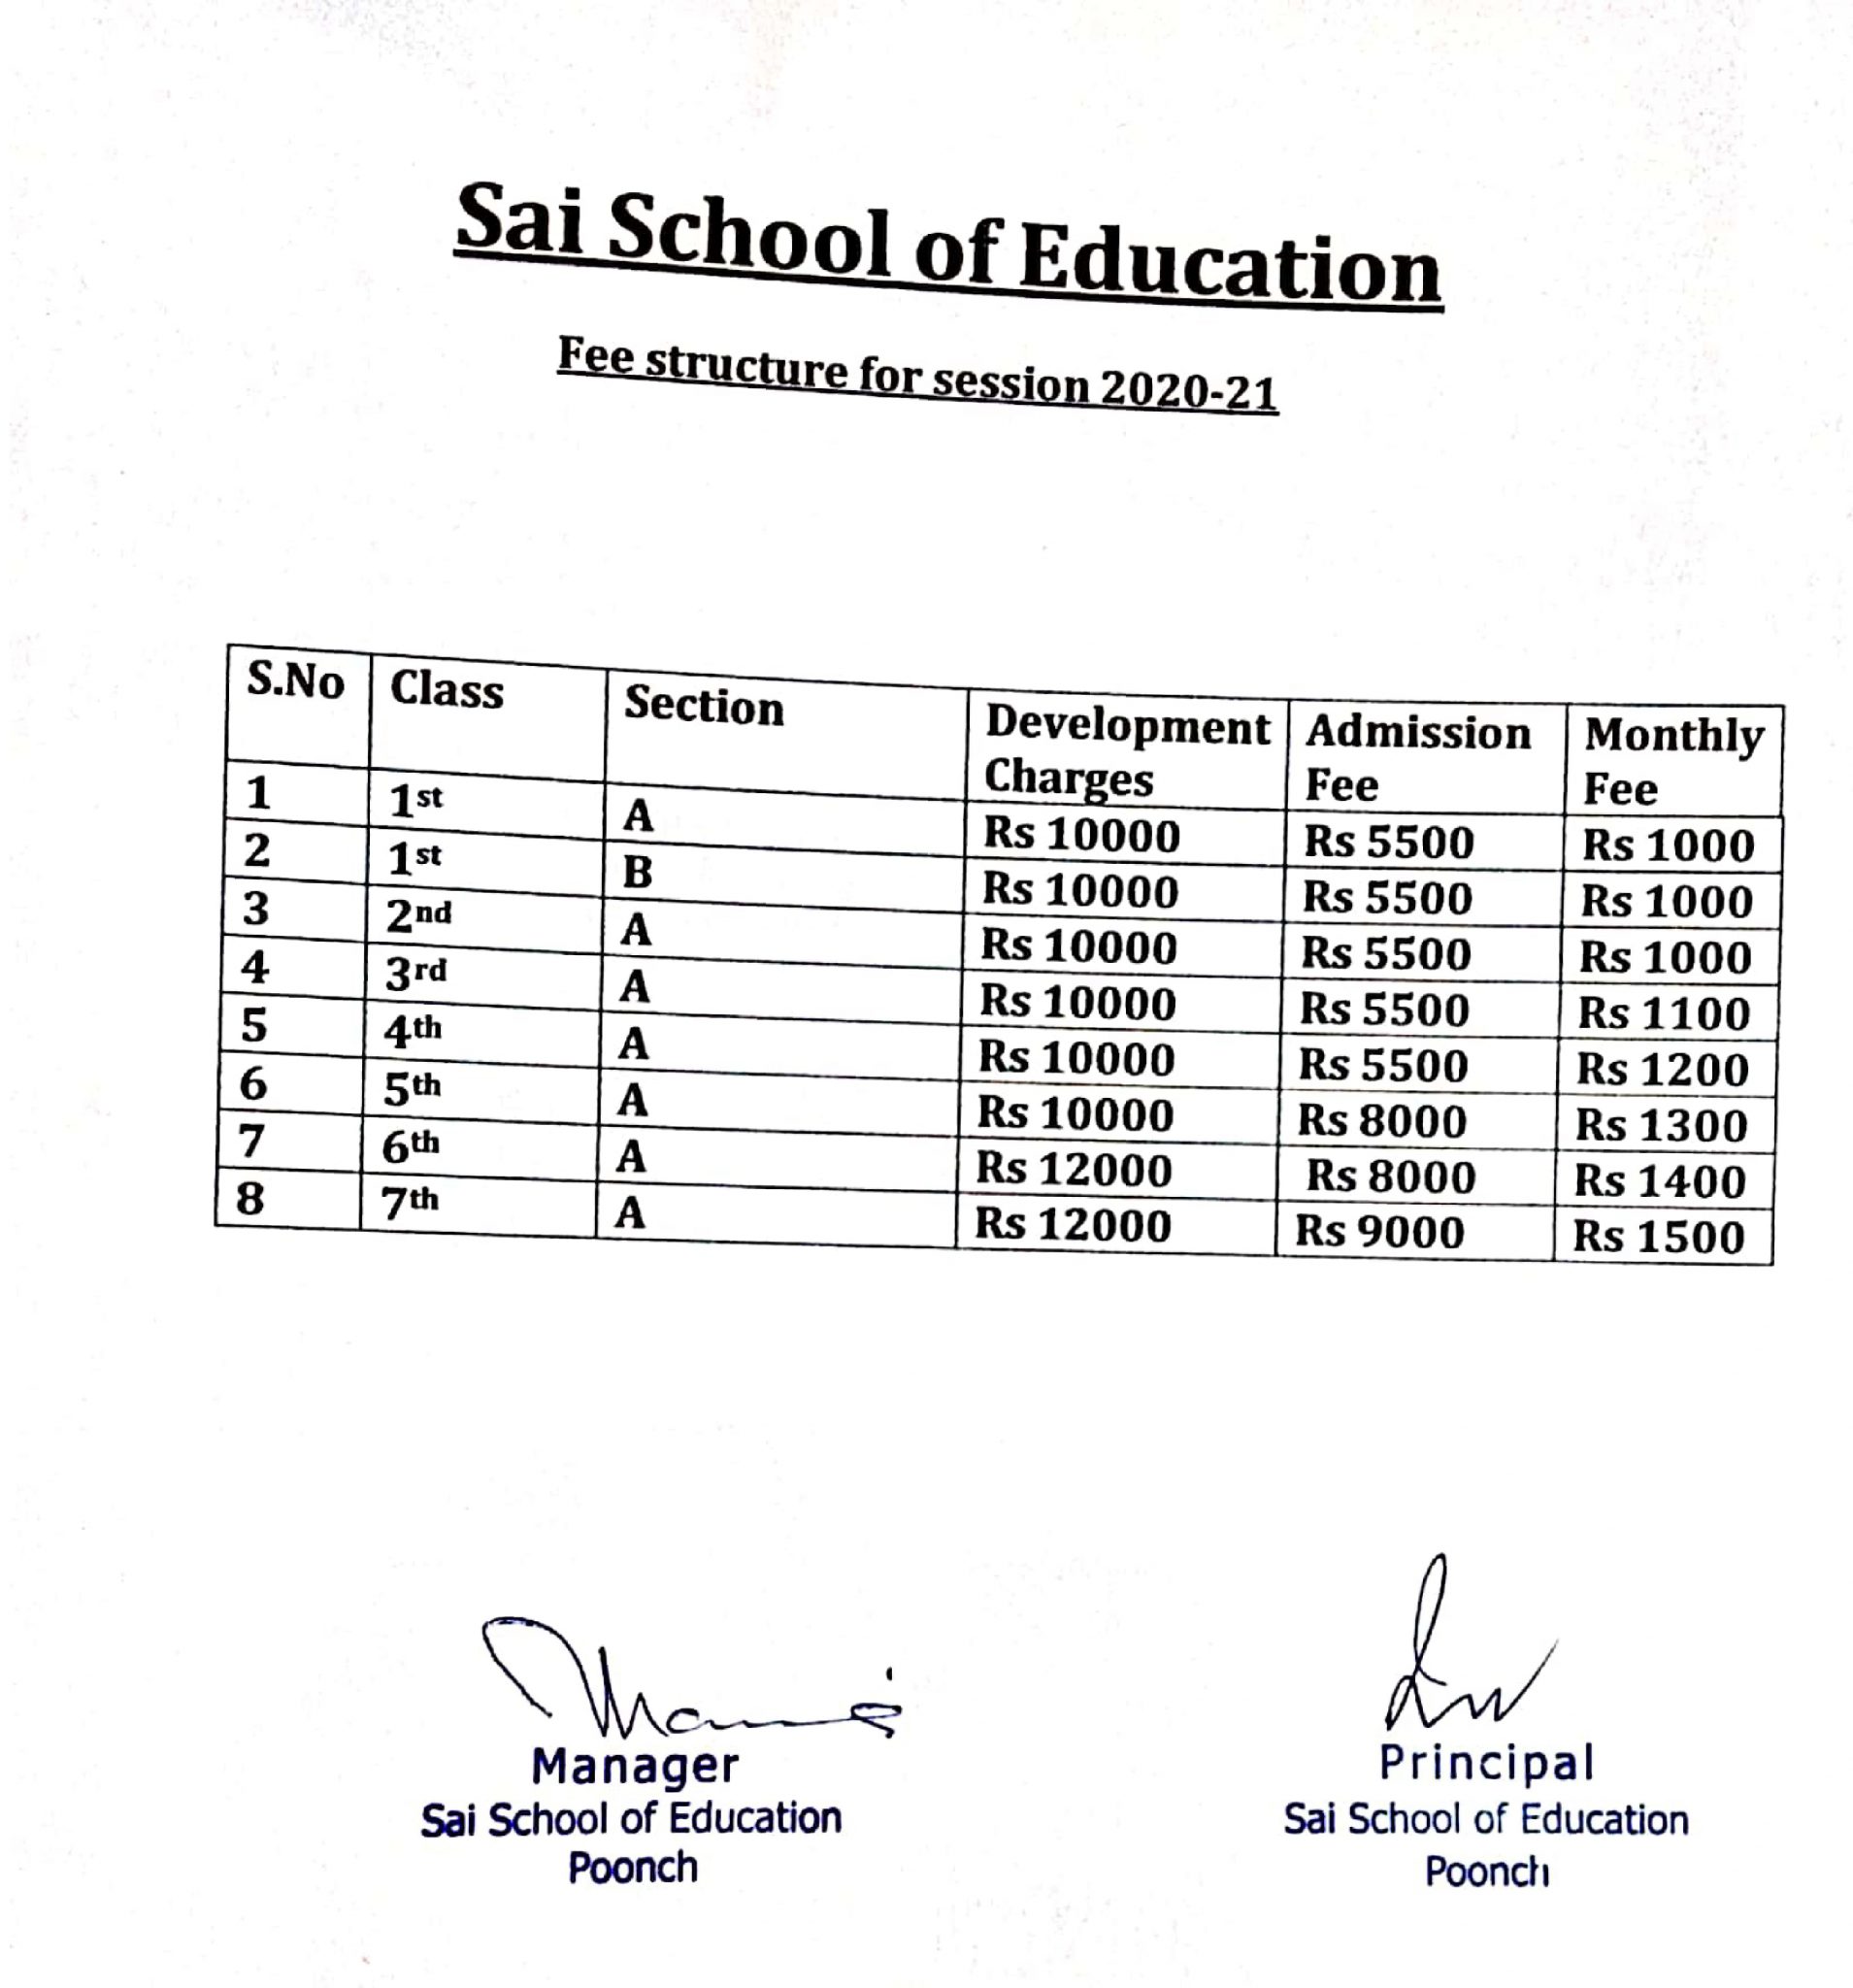 fees-structure-sai-school-of-education